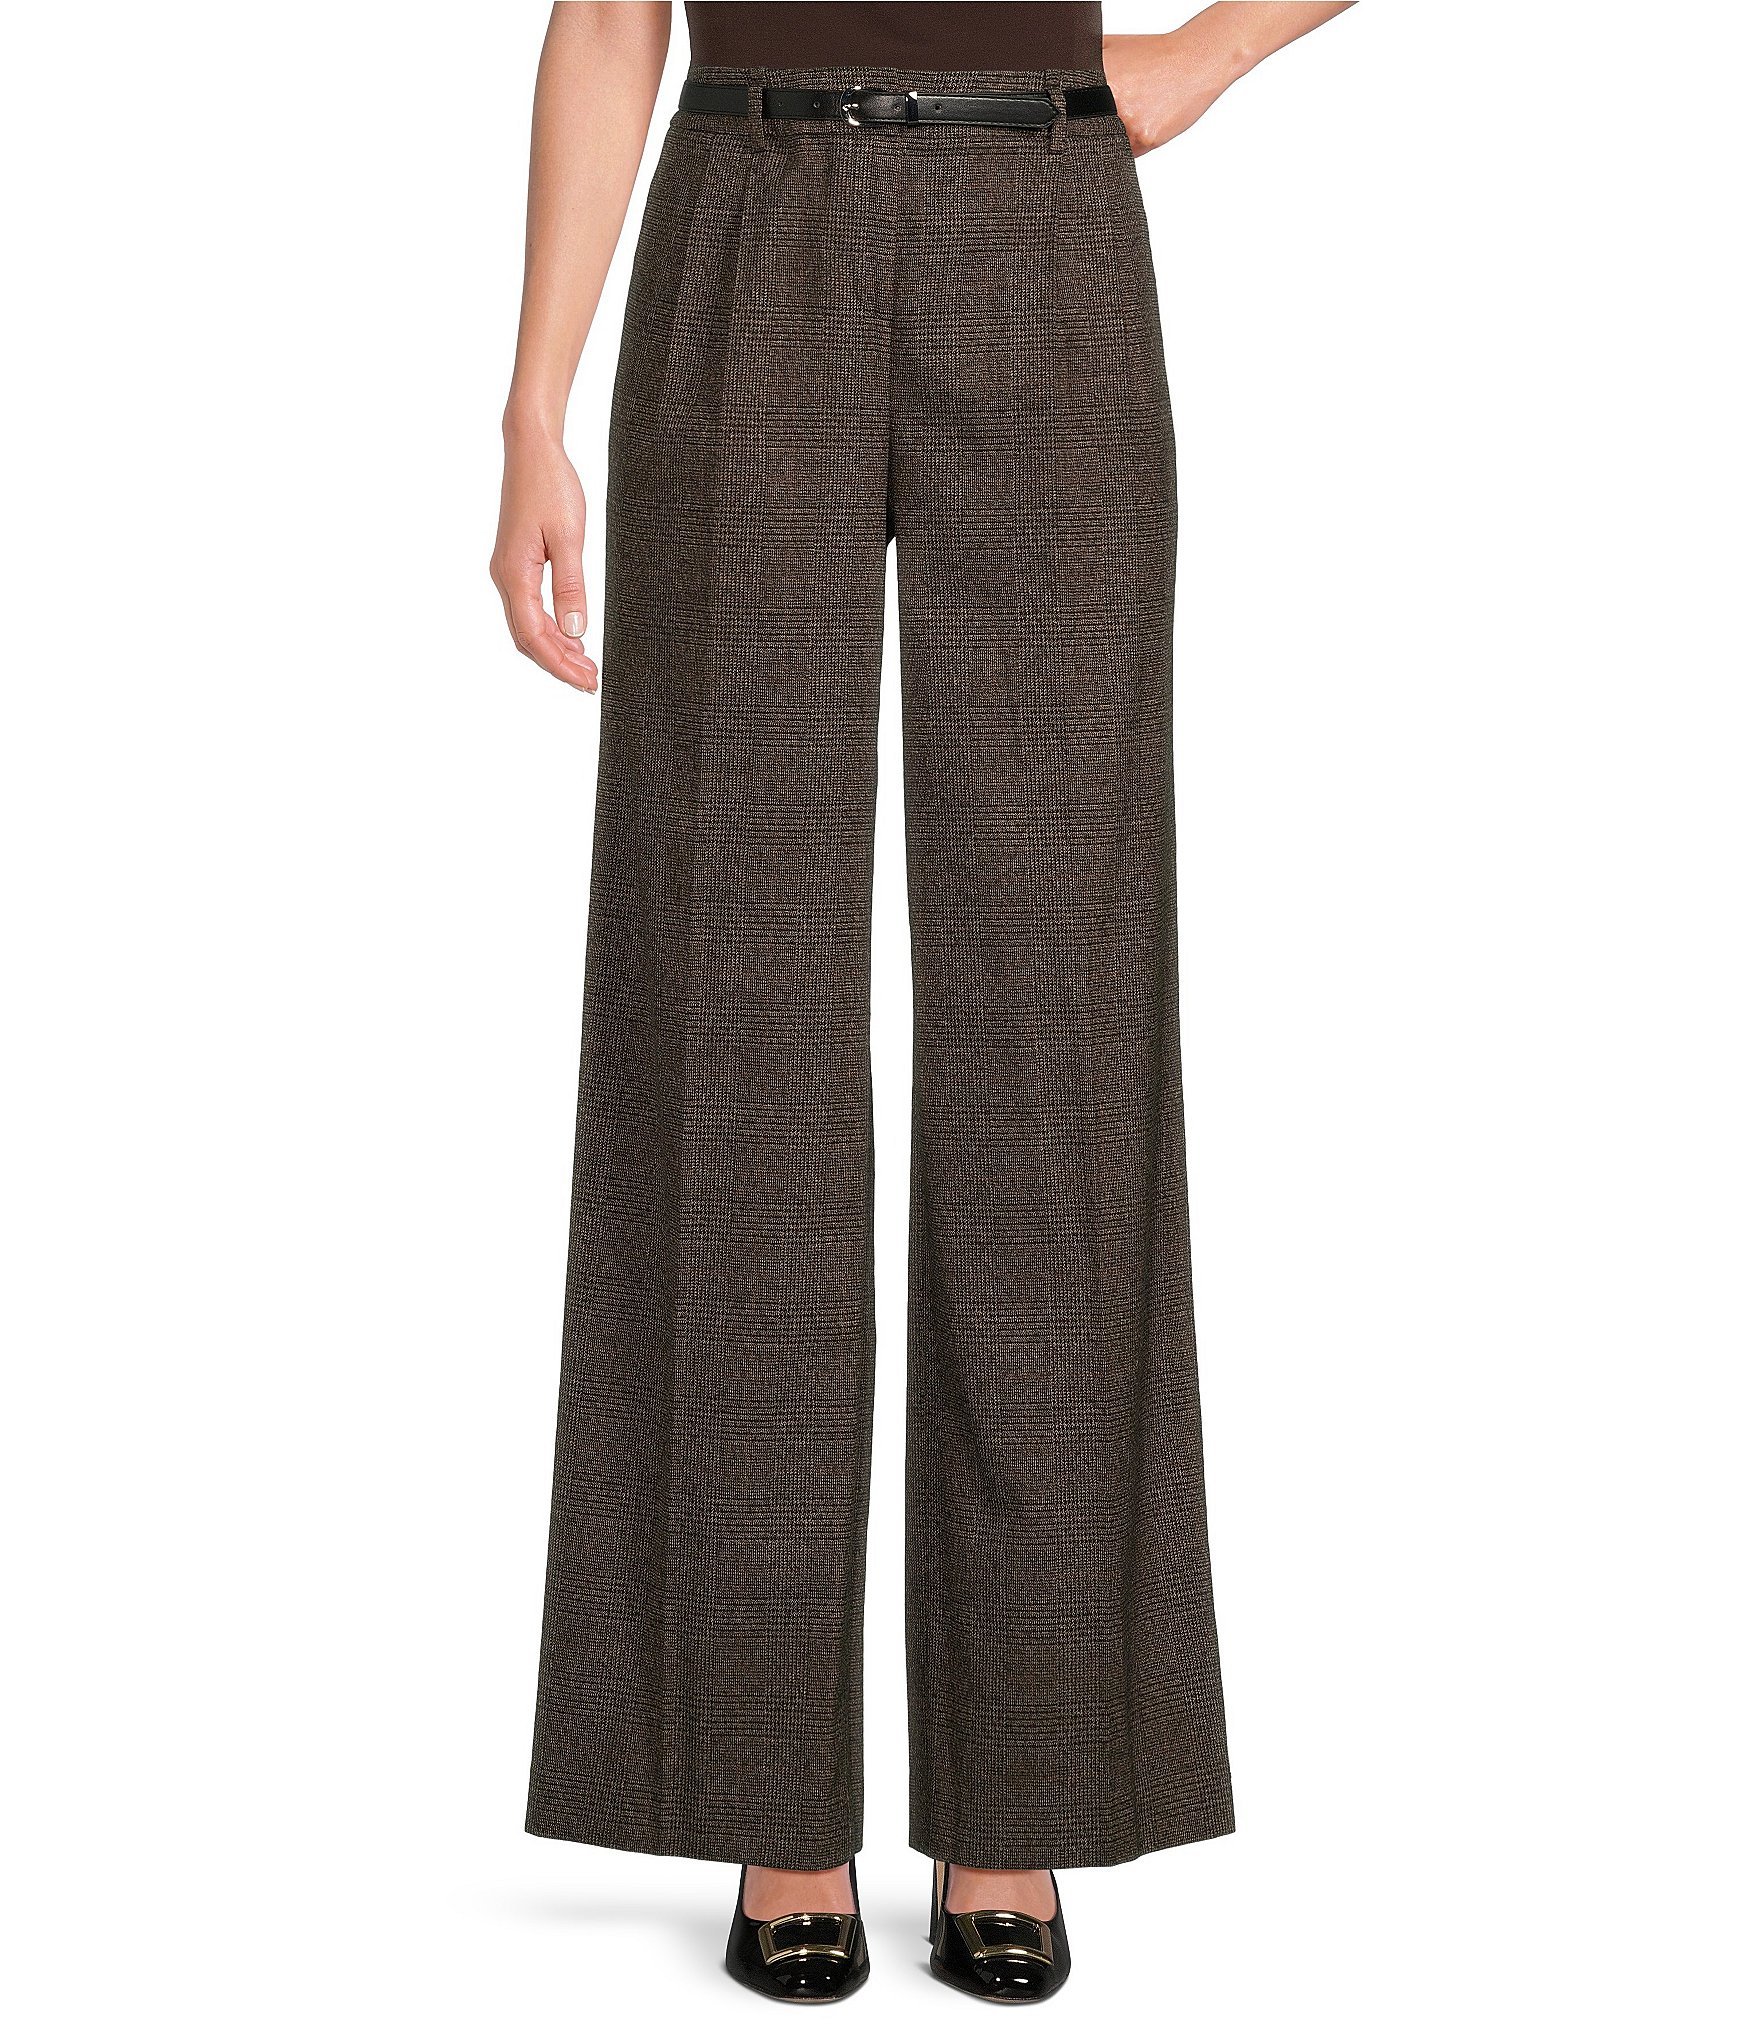 Calvin Klein Woven Plaid Print Belted Pleat Front Coordinating Pants ...